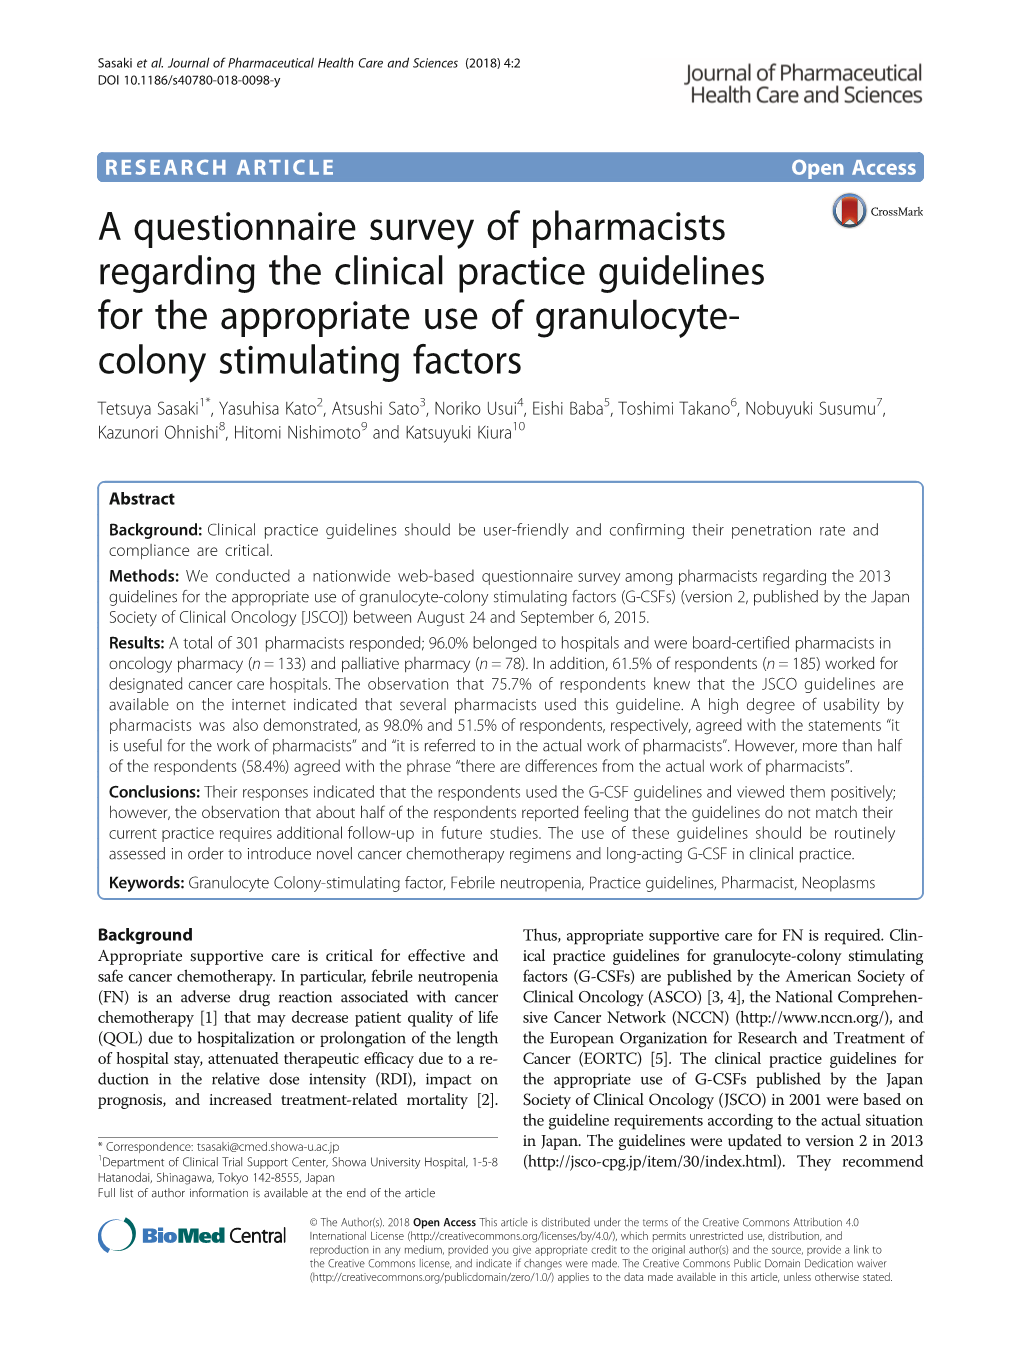 A Questionnaire Survey of Pharmacists Regarding the Clinical Practice